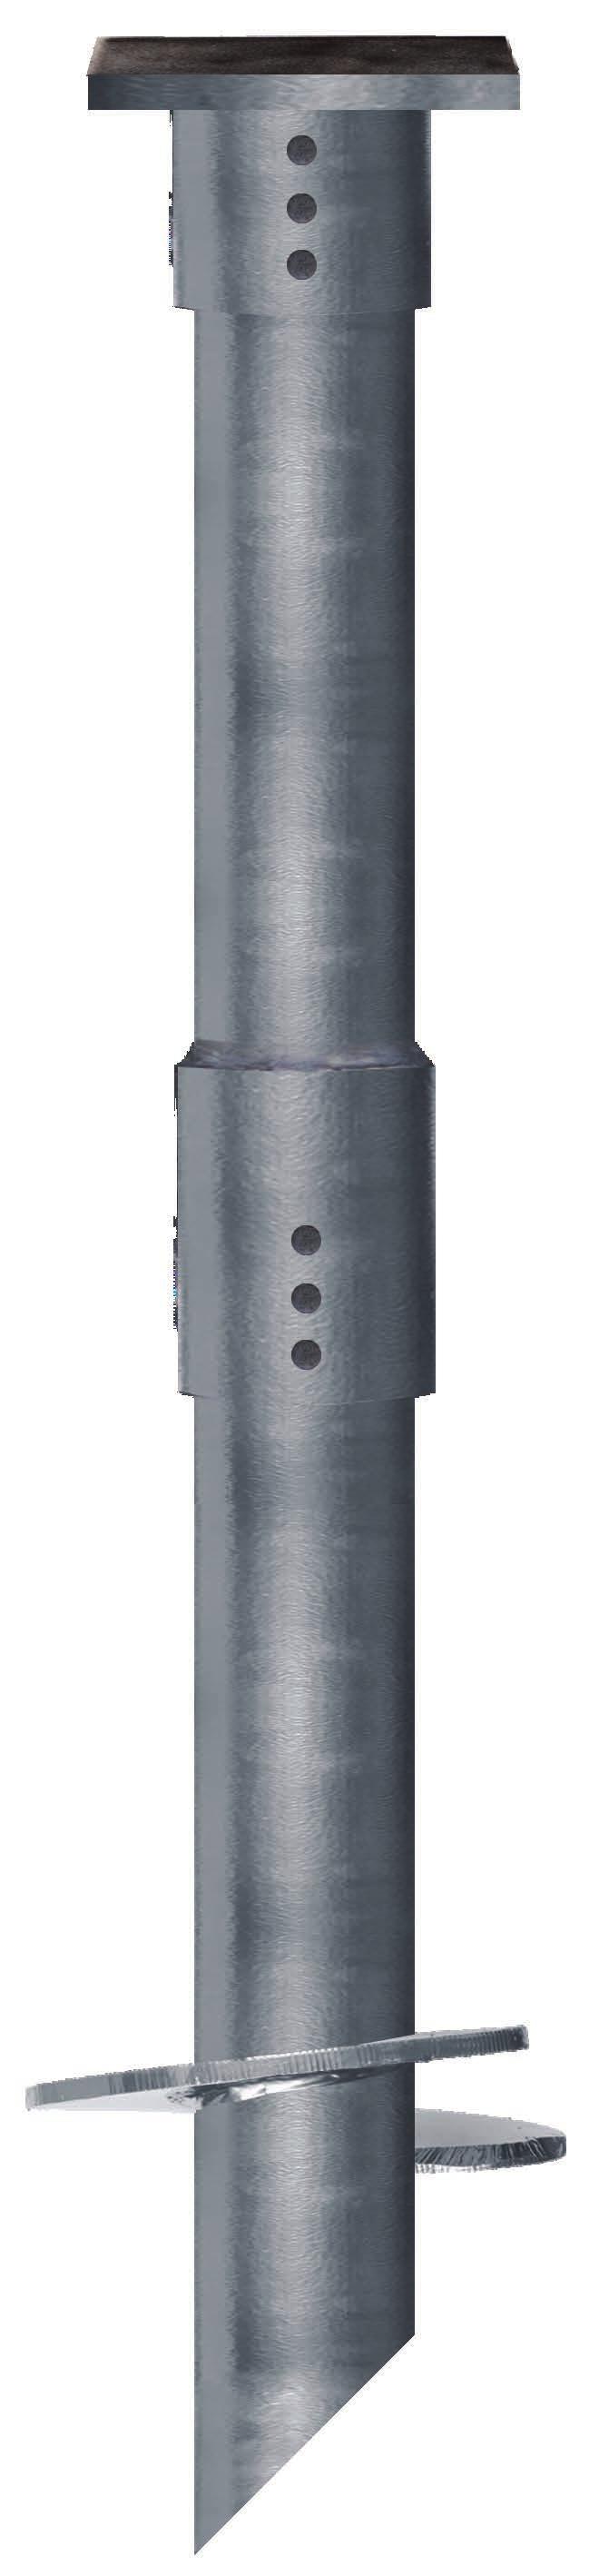 BRACKET OR LOAD TRANSFER DEVICE (LTD) EXTENSION BOLTED COUPLING LEAD SECTION HELIX GET FAMILIAR The unit is called a helical pier if it resists compressive loads, which are usually